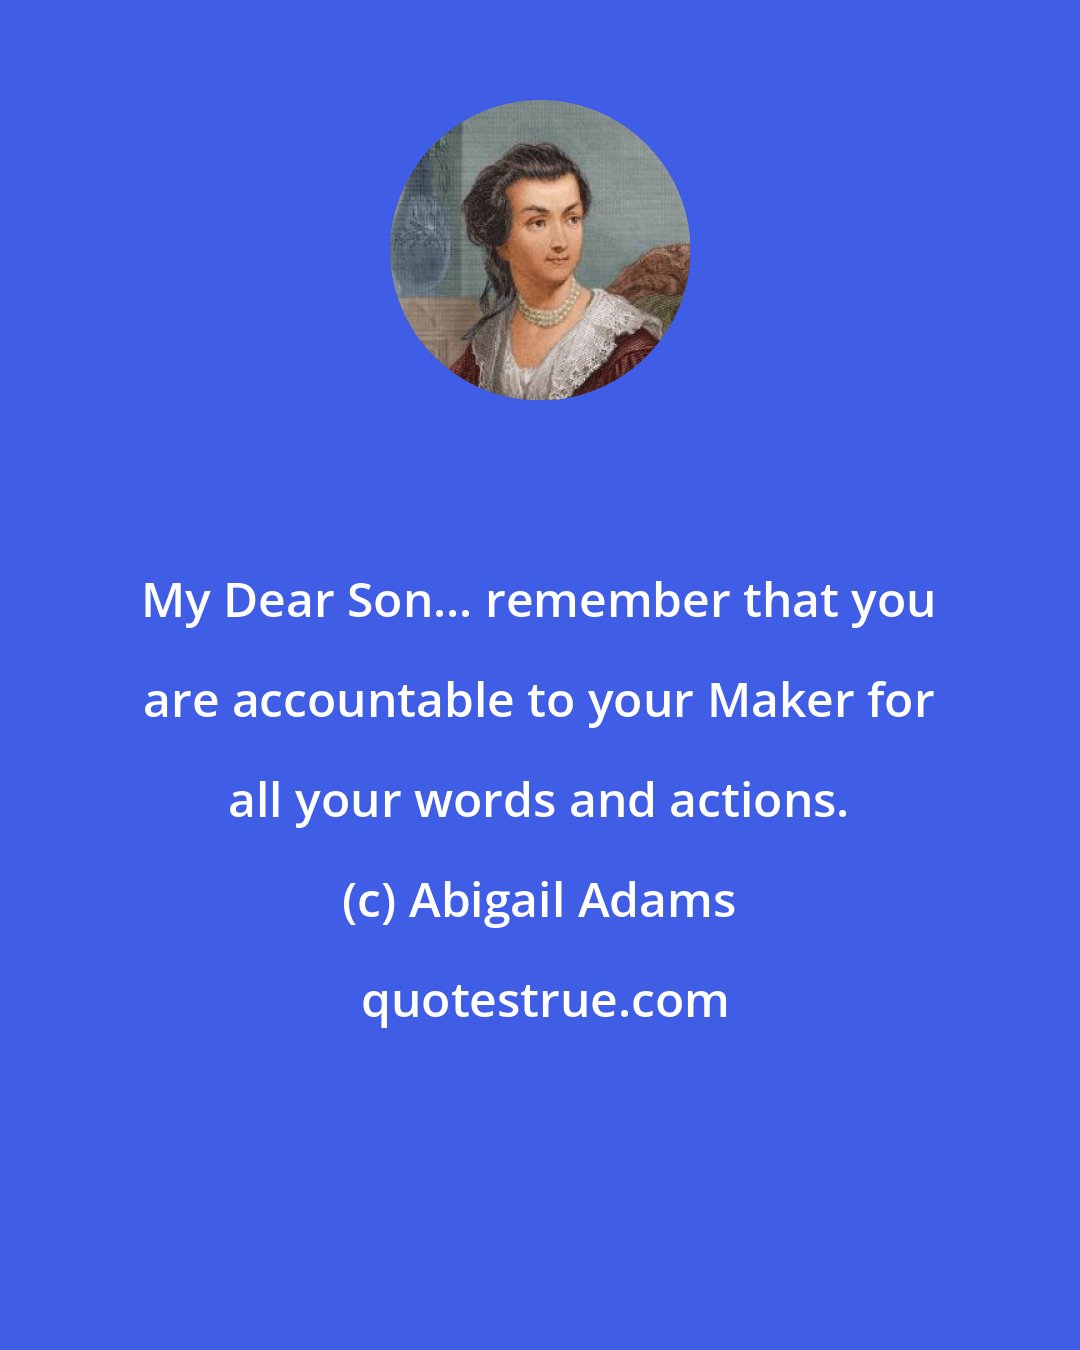 Abigail Adams: My Dear Son... remember that you are accountable to your Maker for all your words and actions.